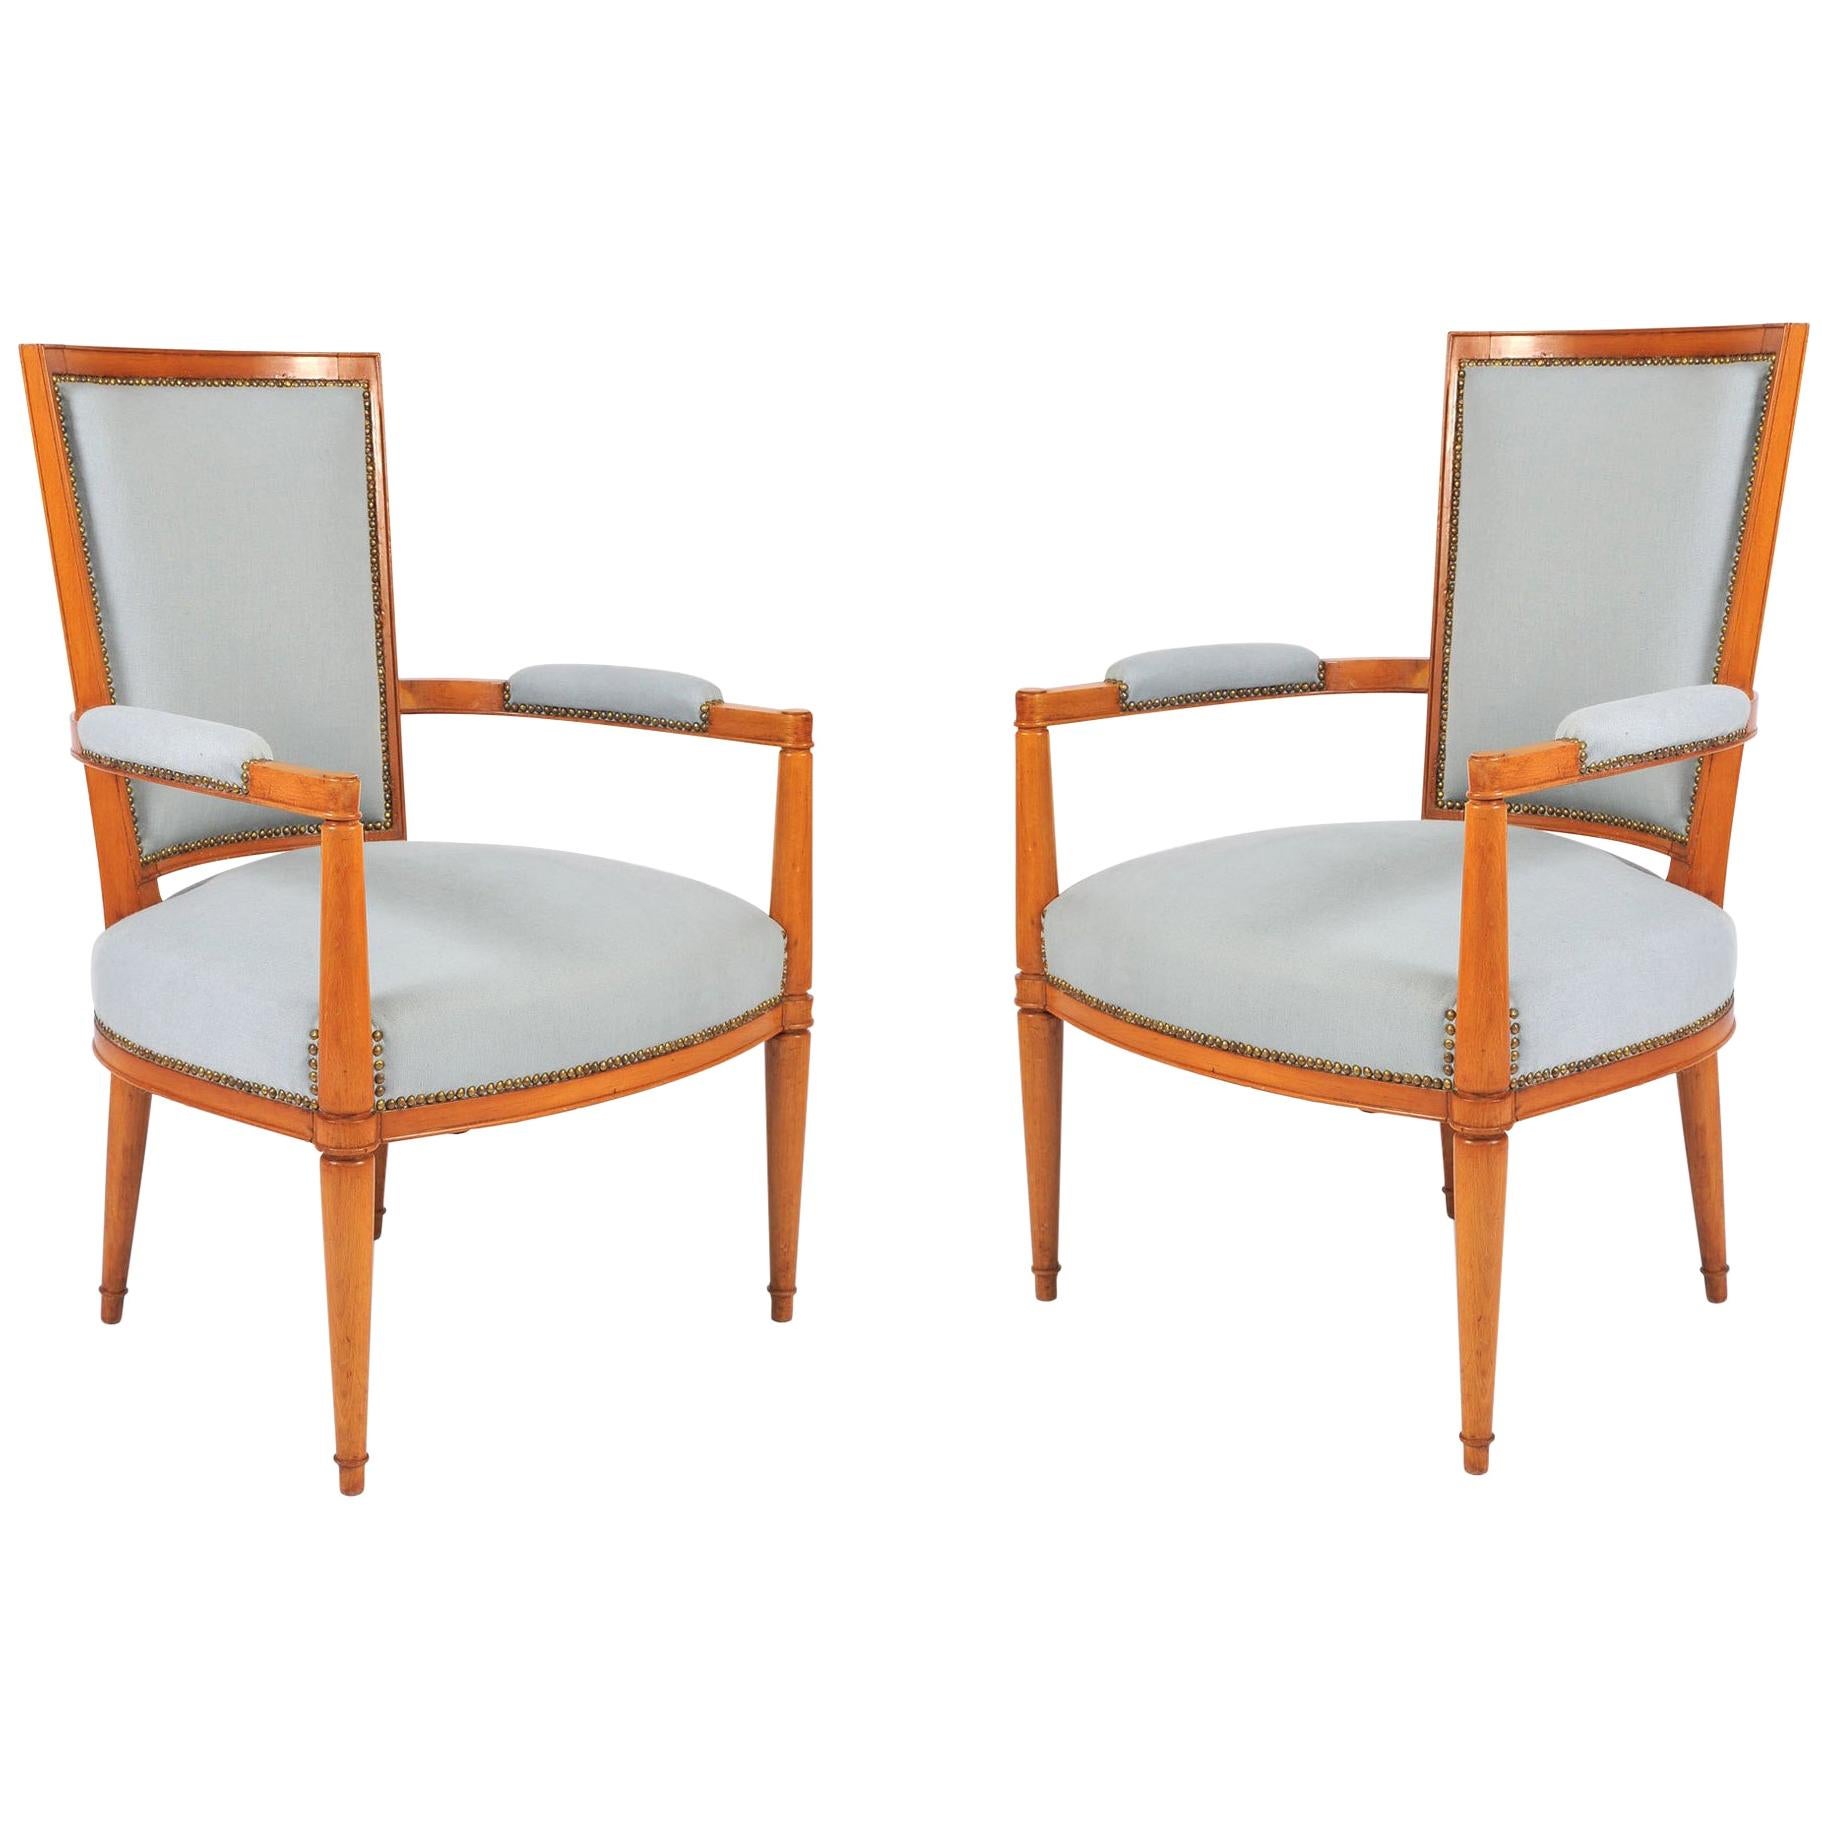 Pair of 1930s French Chairs by André Arbus